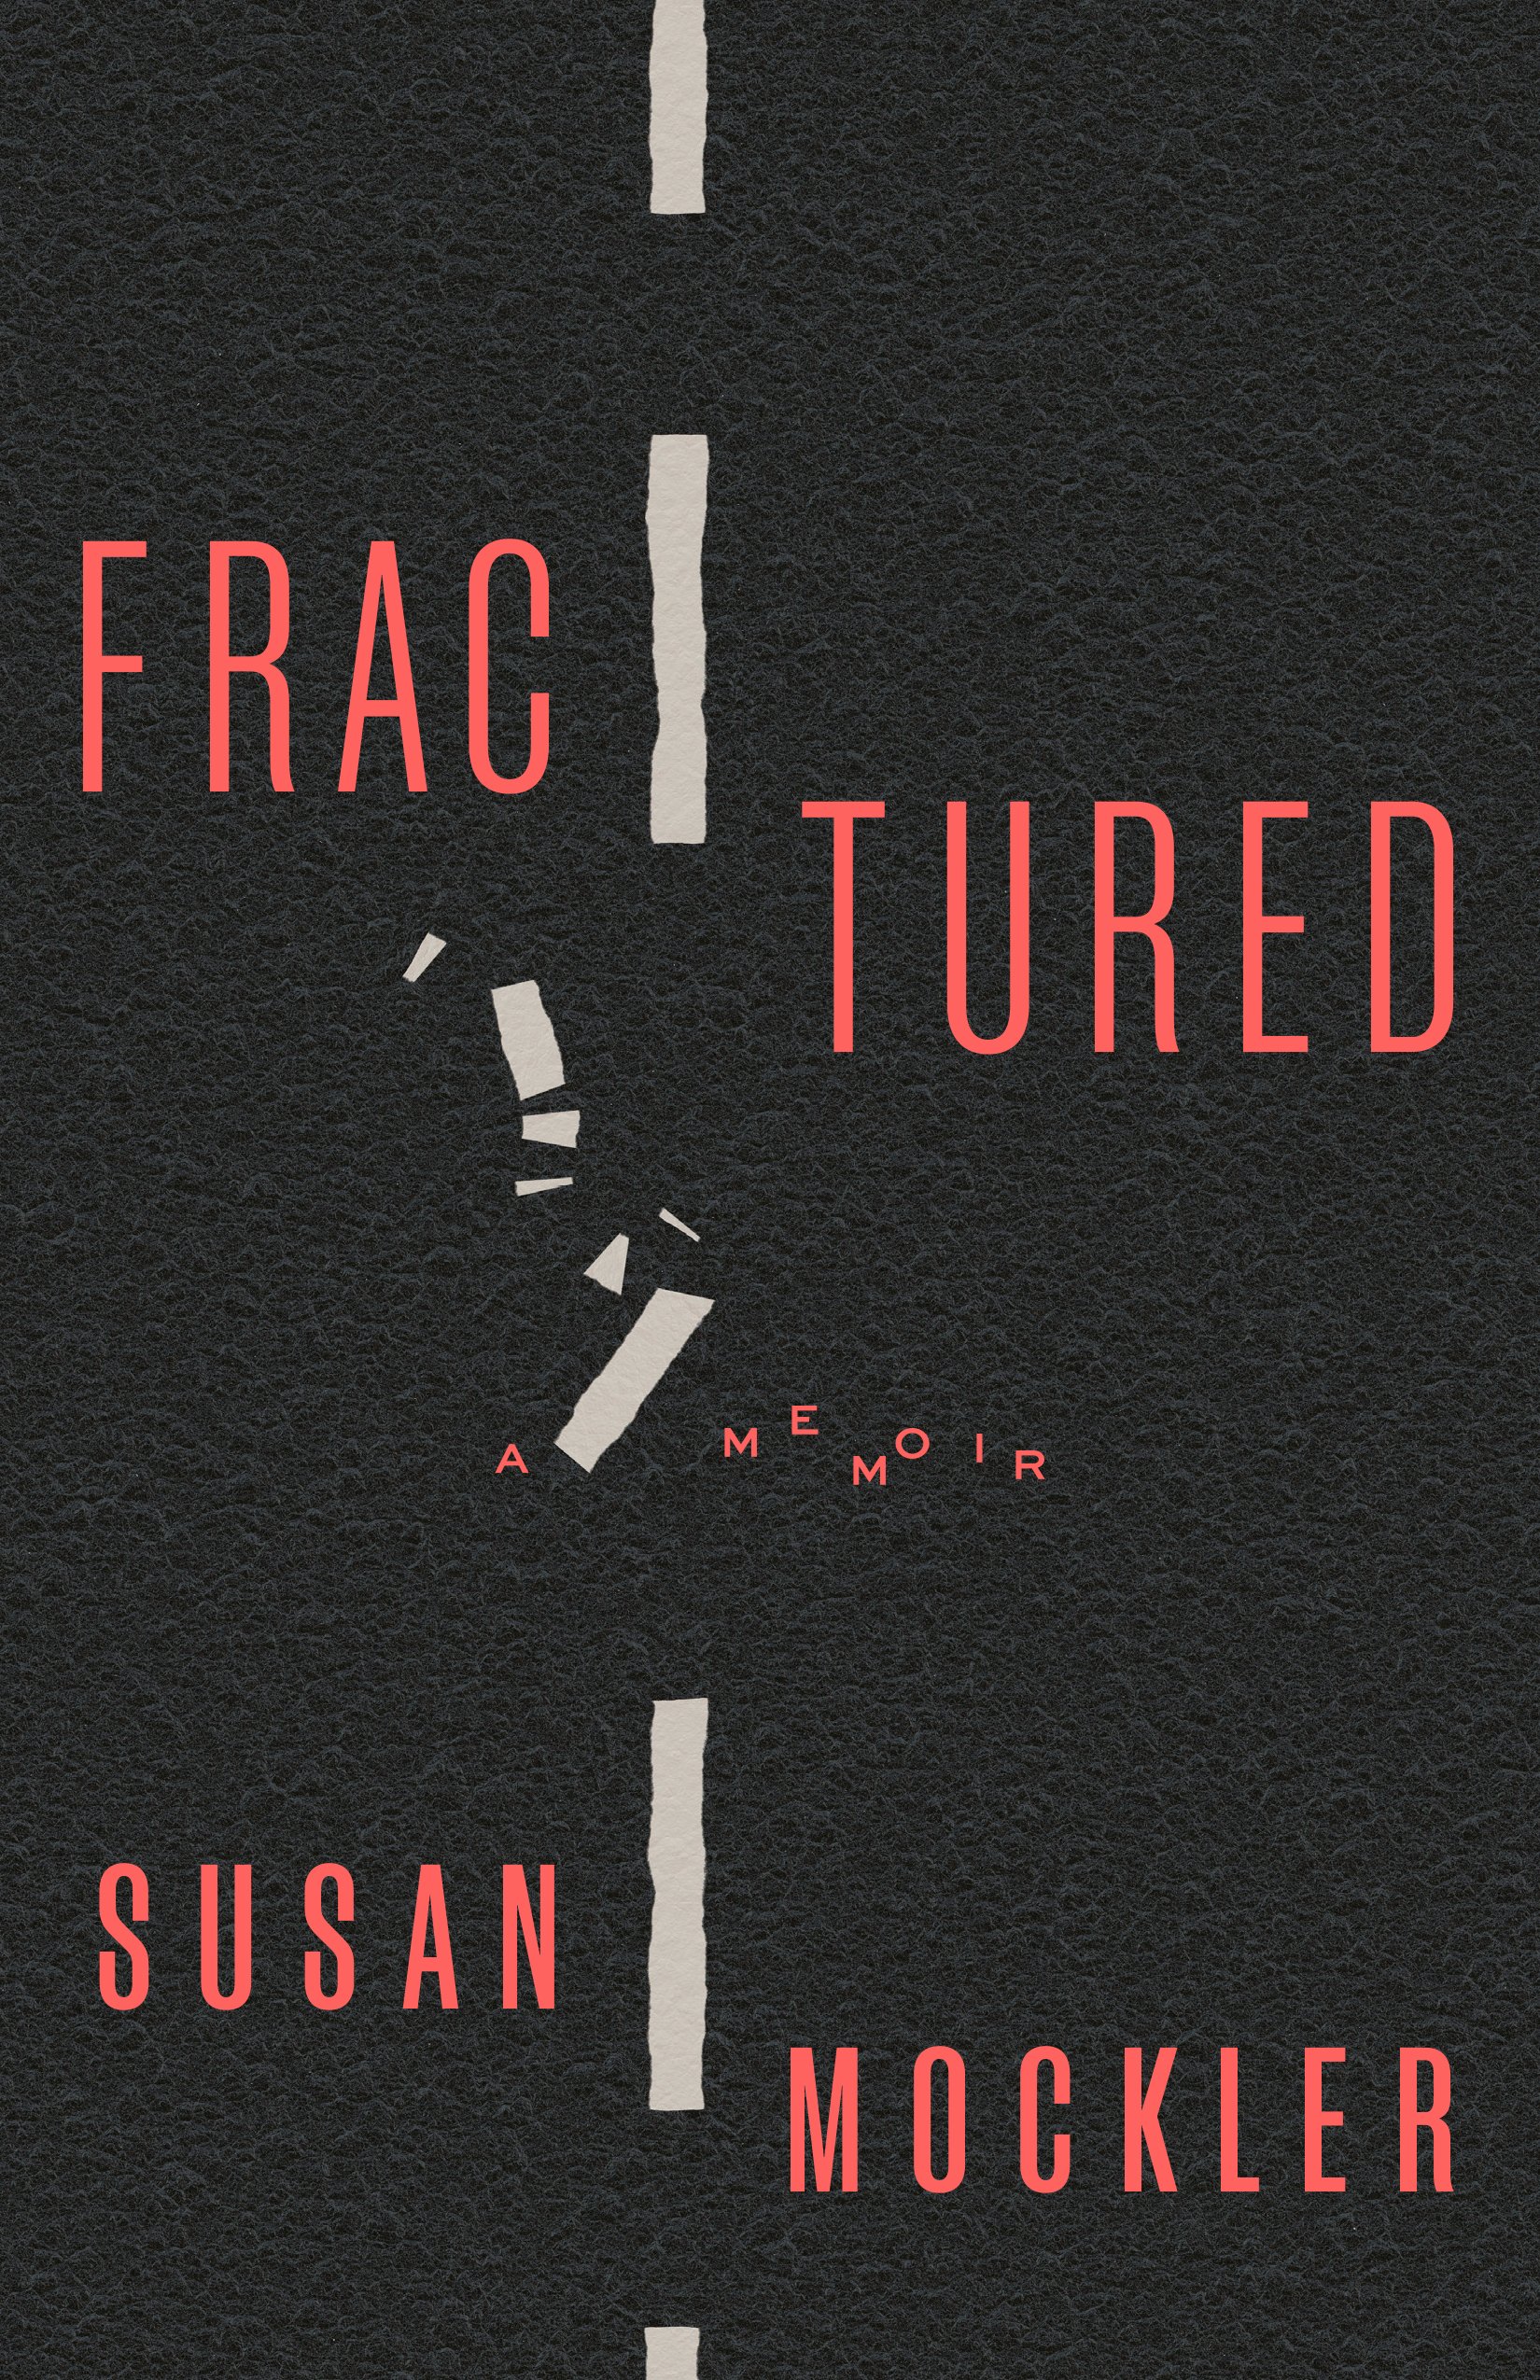 Book cover with title: Fractured along with a graphic that is a stylized rendering of a broken vertebrae